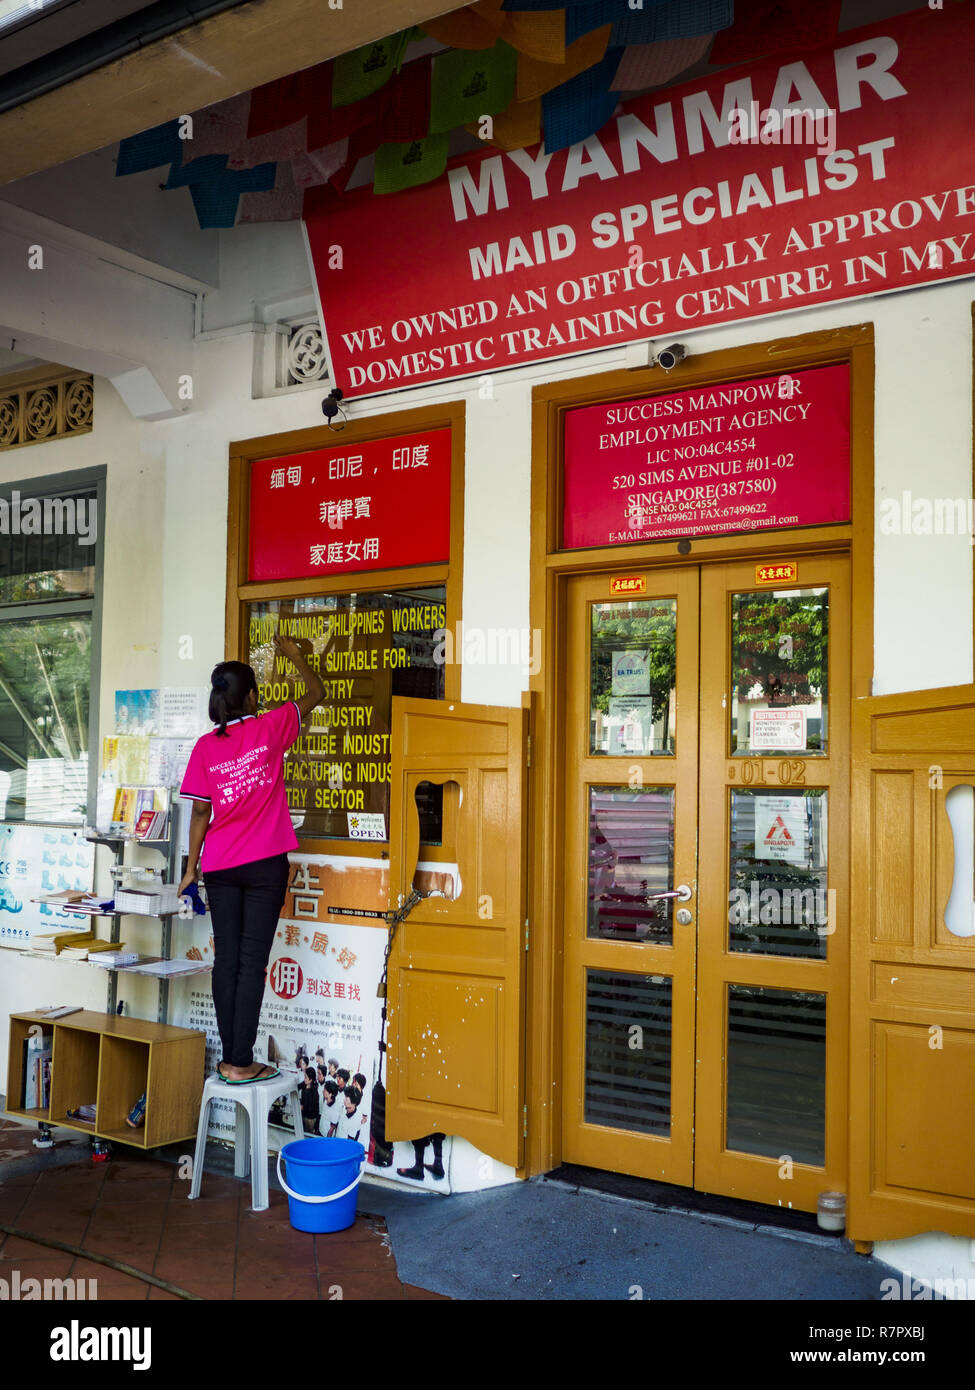 Singapore, Singapore. 11th Dec, 2018. An employment agency in the Geylang neighborhood that specializes in placing Burmese women as domestic servants in Singapore. The Geylang area of Singapore, between the Central Business District and Changi Airport, was originally coconut plantations and Malay villages. During Singapore's boom the coconut plantations and other farms were pushed out and now the area is a working class community of Malay, Indian and Chinese people. In the 2000s, developers started gentrifying Geylang and new housing estate developments were built. (Credit Image: © Jack K Stock Photo